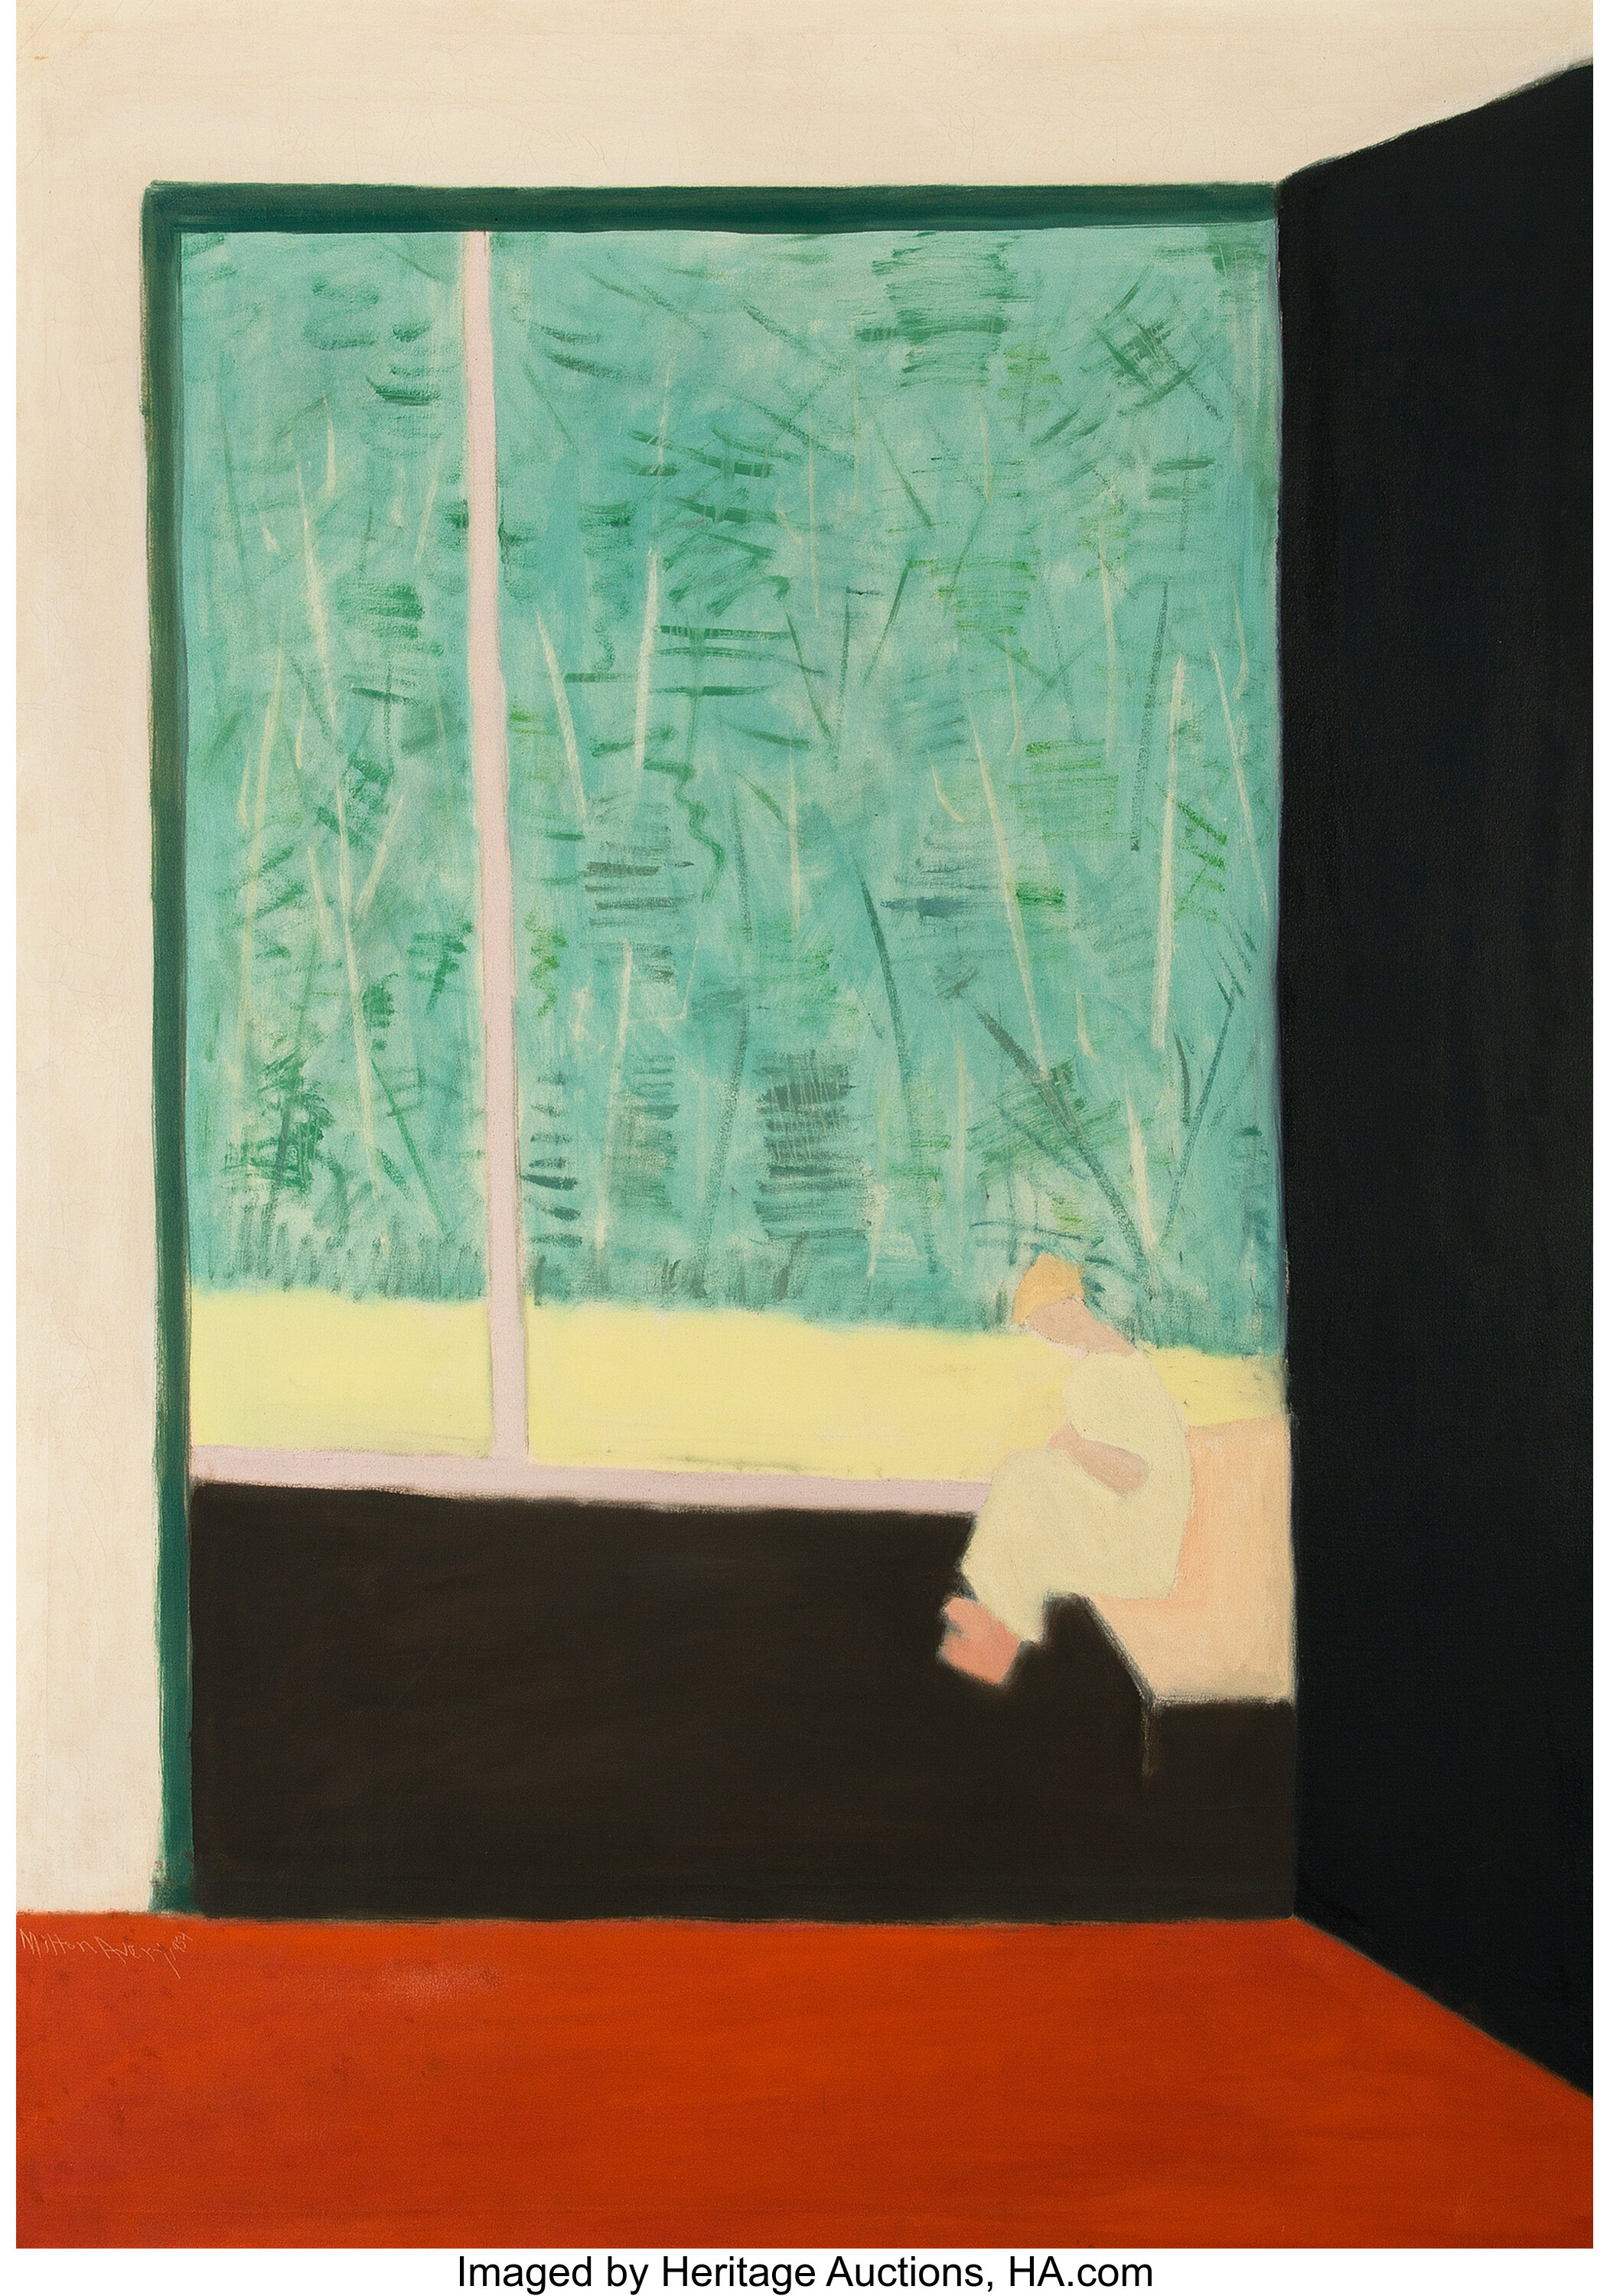 Milton Avery Paintings for Sale | Value Guide | Heritage Auctions